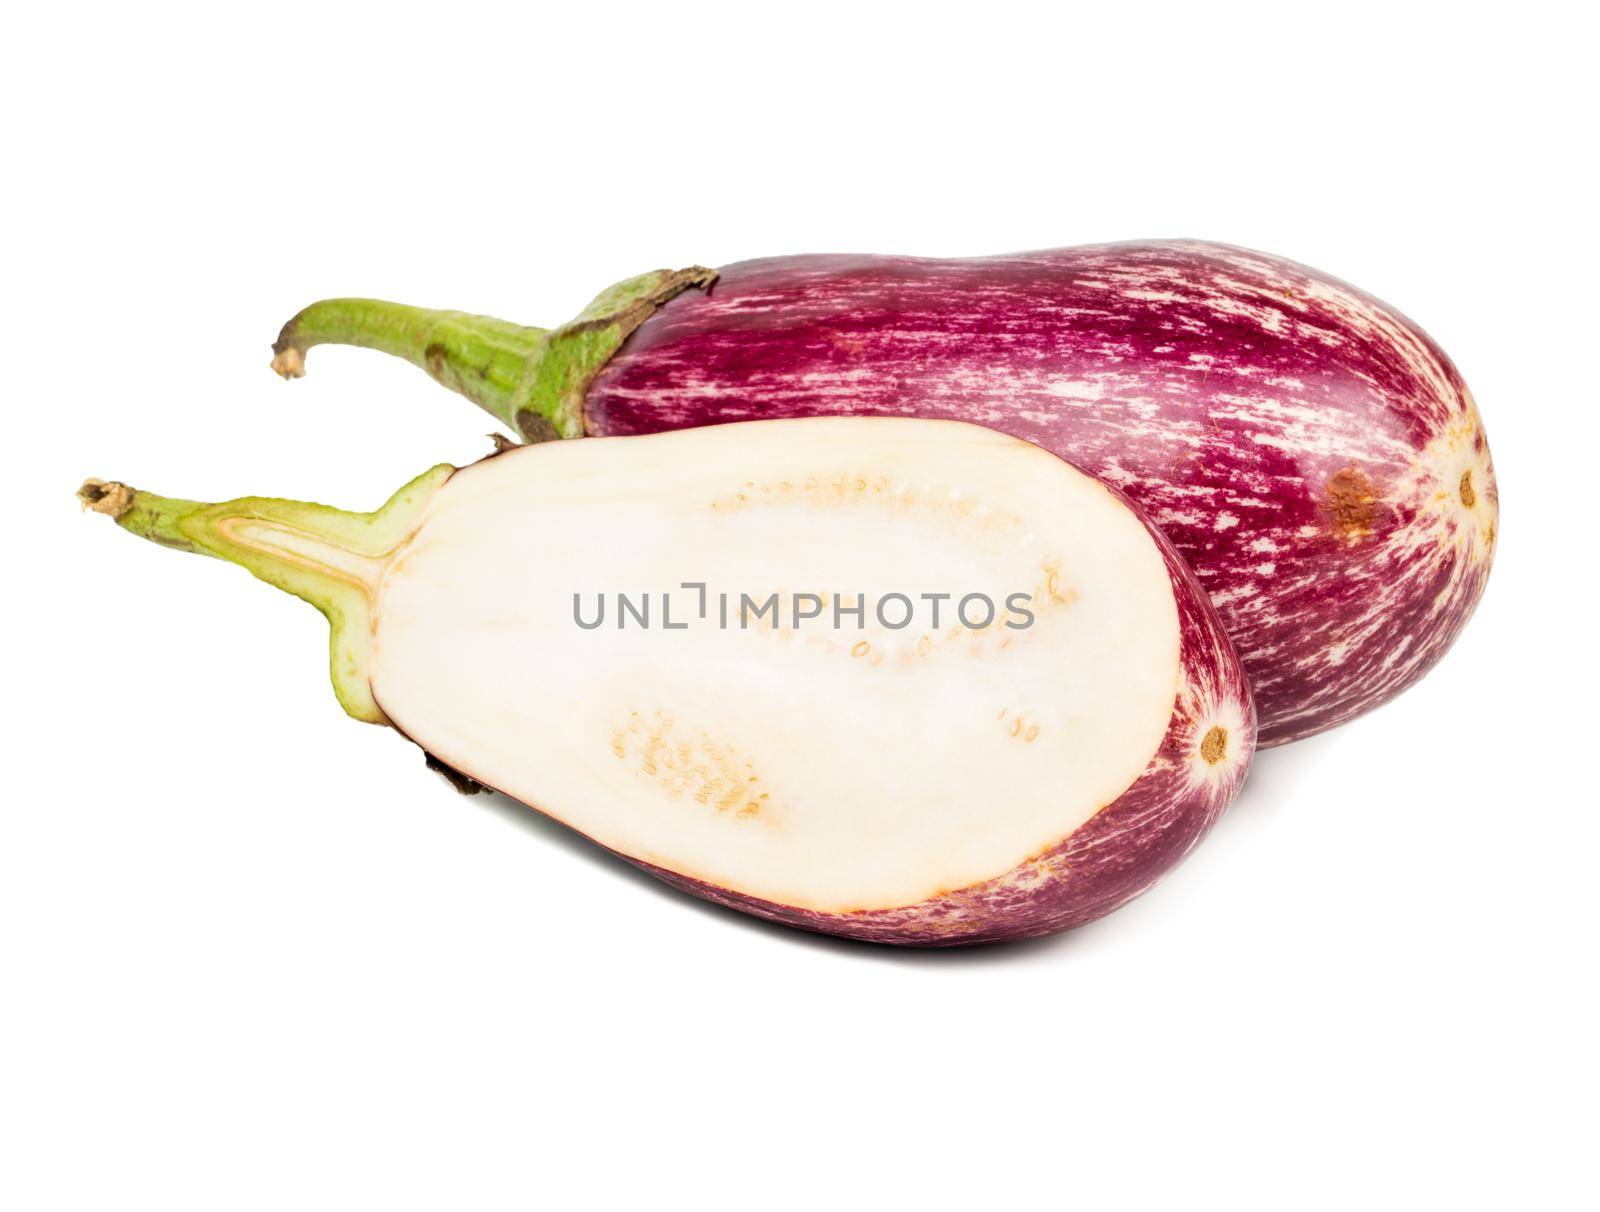 Purple eggplant with half by andregric